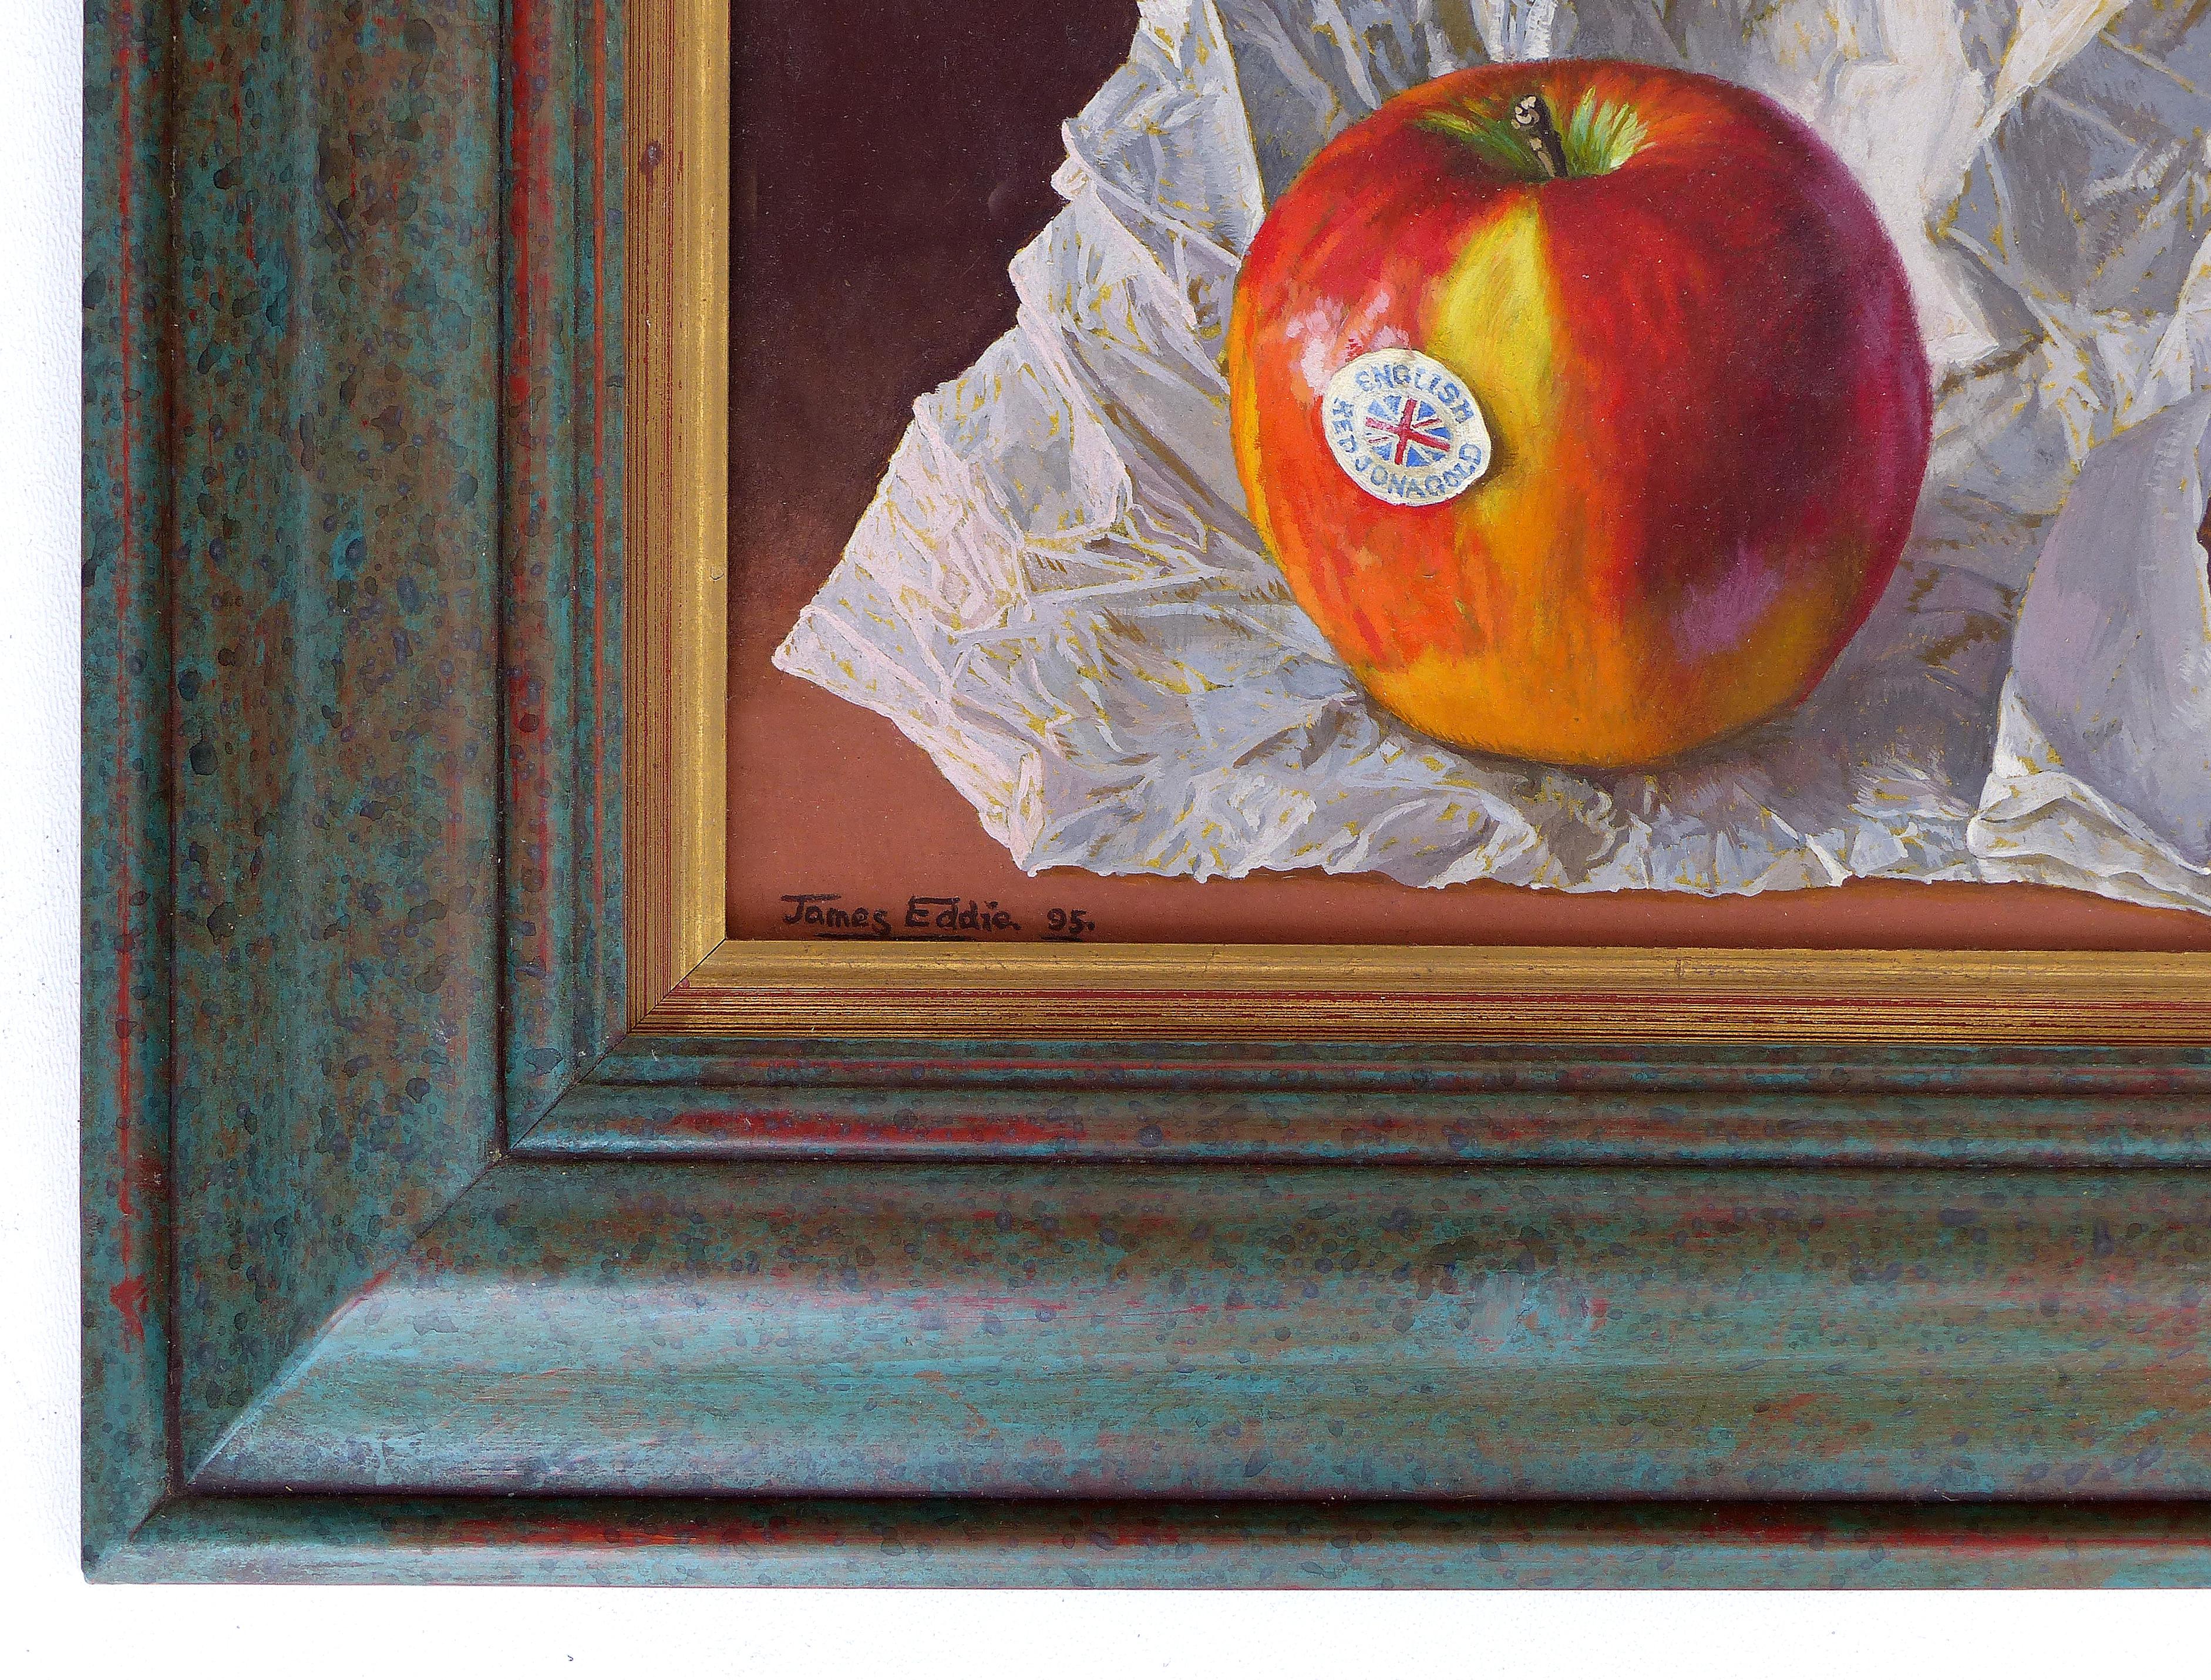 Super-realism Still-life Apple Painting by James Eddie, 1995 

Offered for sale is a beautifully executed super-realism still-life painting by James Eddie. The painting is signed in the lower left and dated 1995. The work is displayed in a deep wood